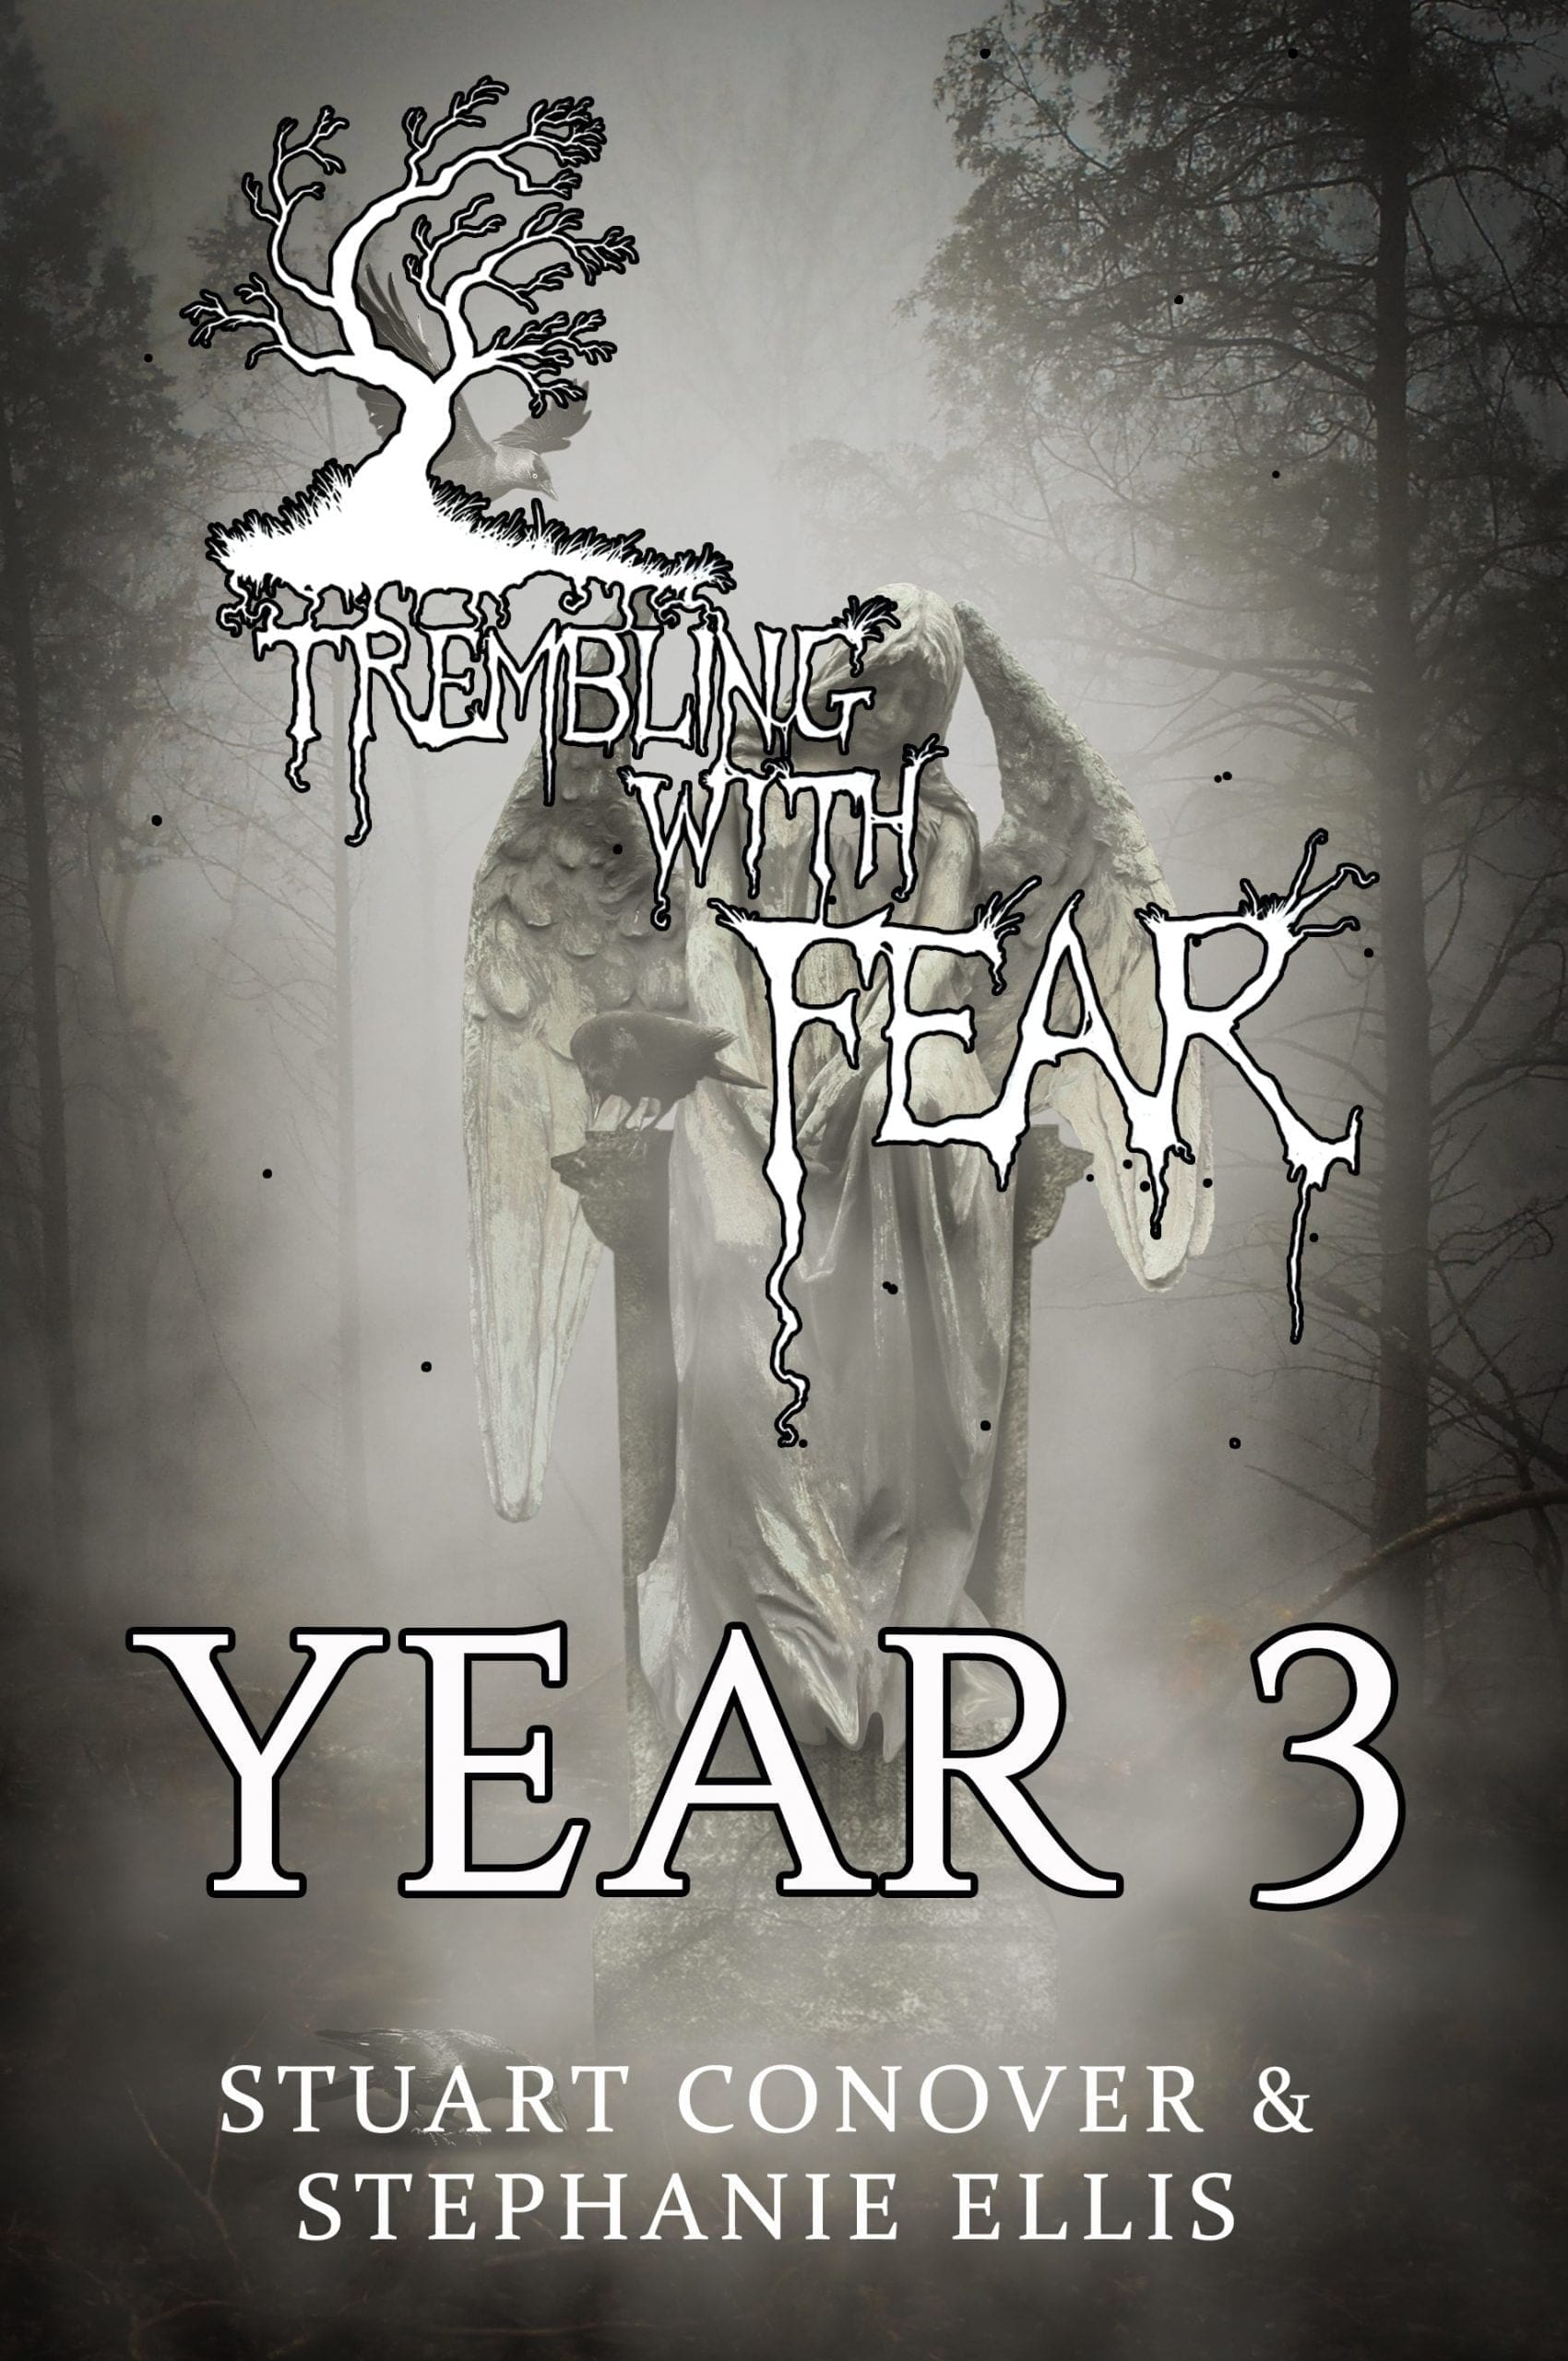 Buy Trembling With Fear! The Horror Tree